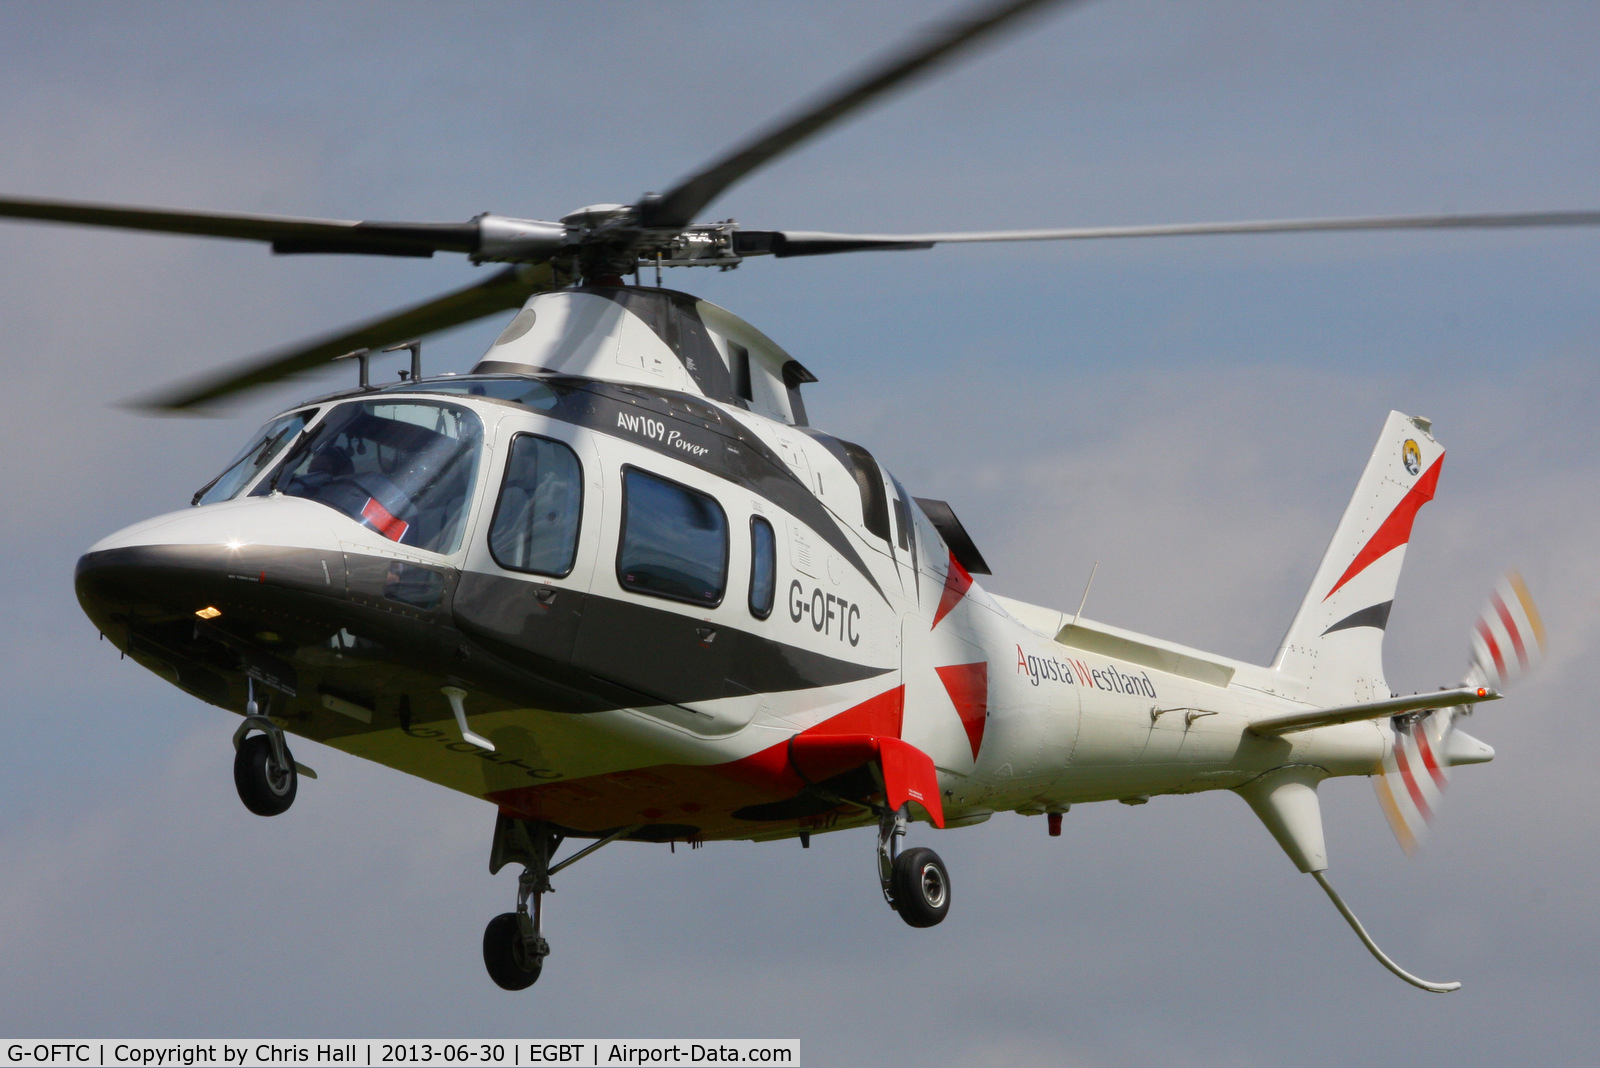 G-OFTC, 1999 Agusta A-109E Power C/N 11043, being used for ferrying race fans to the British F1 Grand Prix at Silverstone